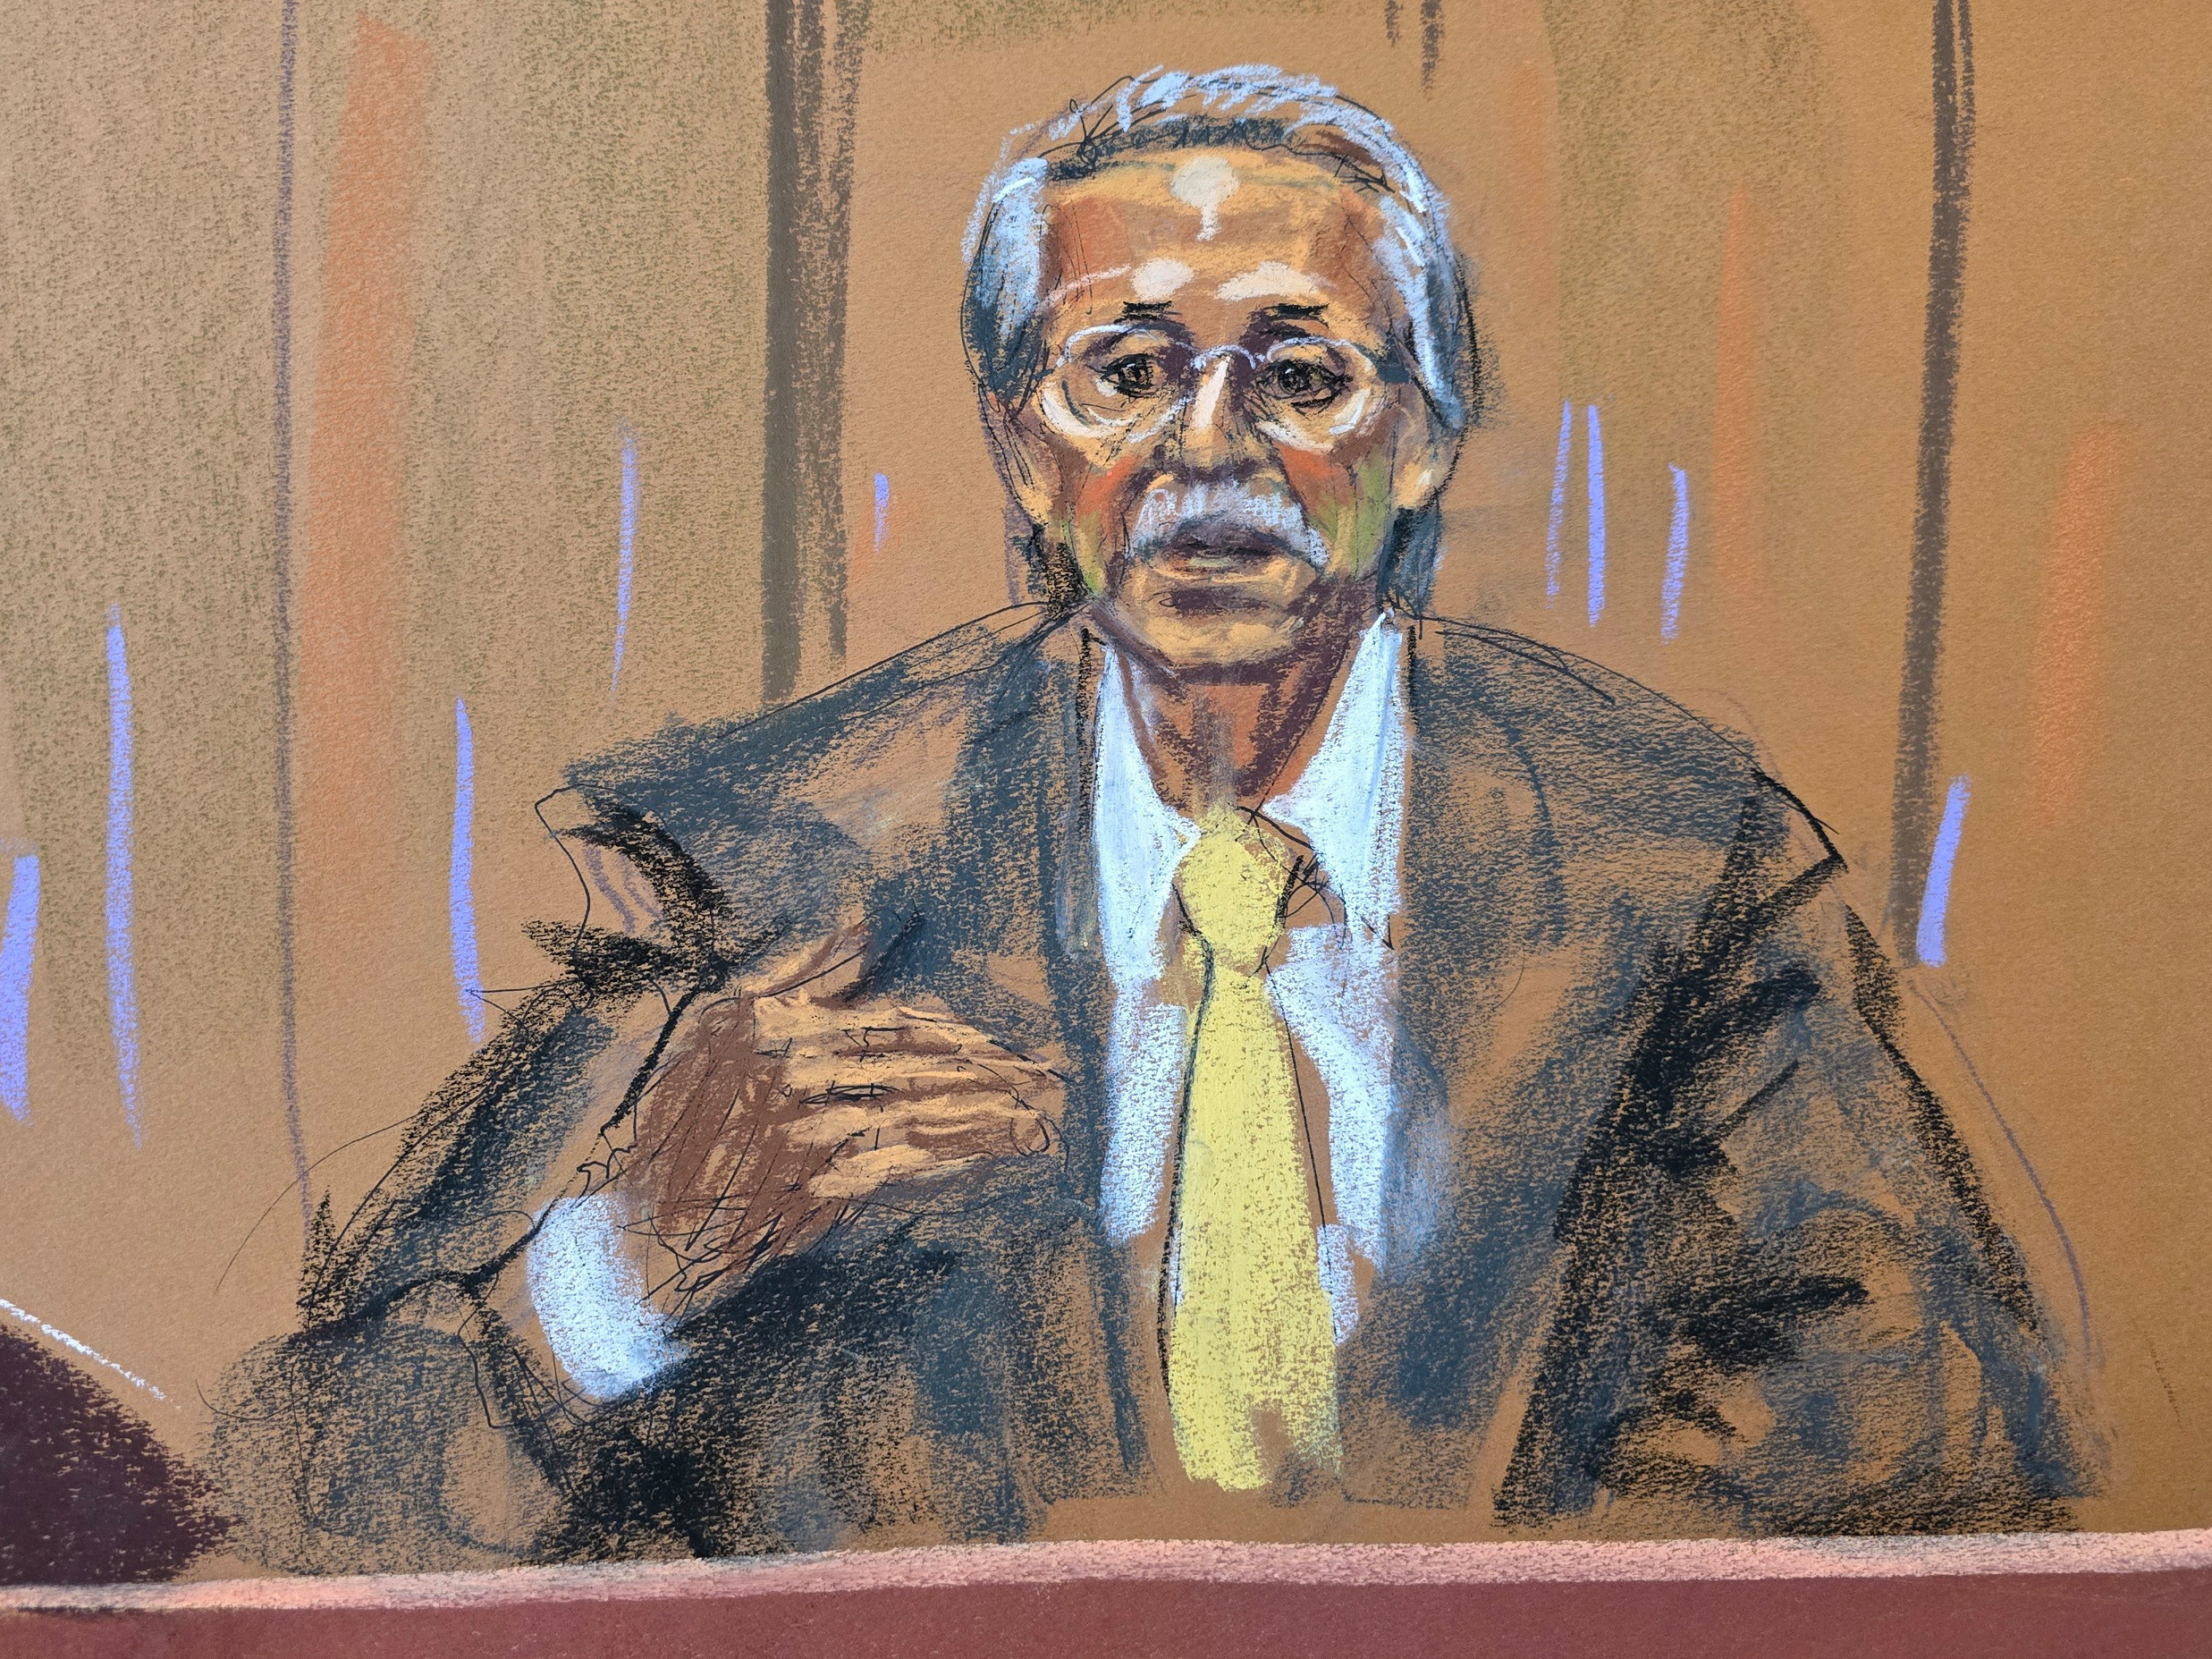 Former National Enquirer publisher David Pecker speaks from the witness stand during Trump's criminal trial on charges that he falsified business records to conceal money paid to silence adult film star Stormy Daniels in 2016, in Manhattan state court in New York City, on Monday, in this courtroom sketch.